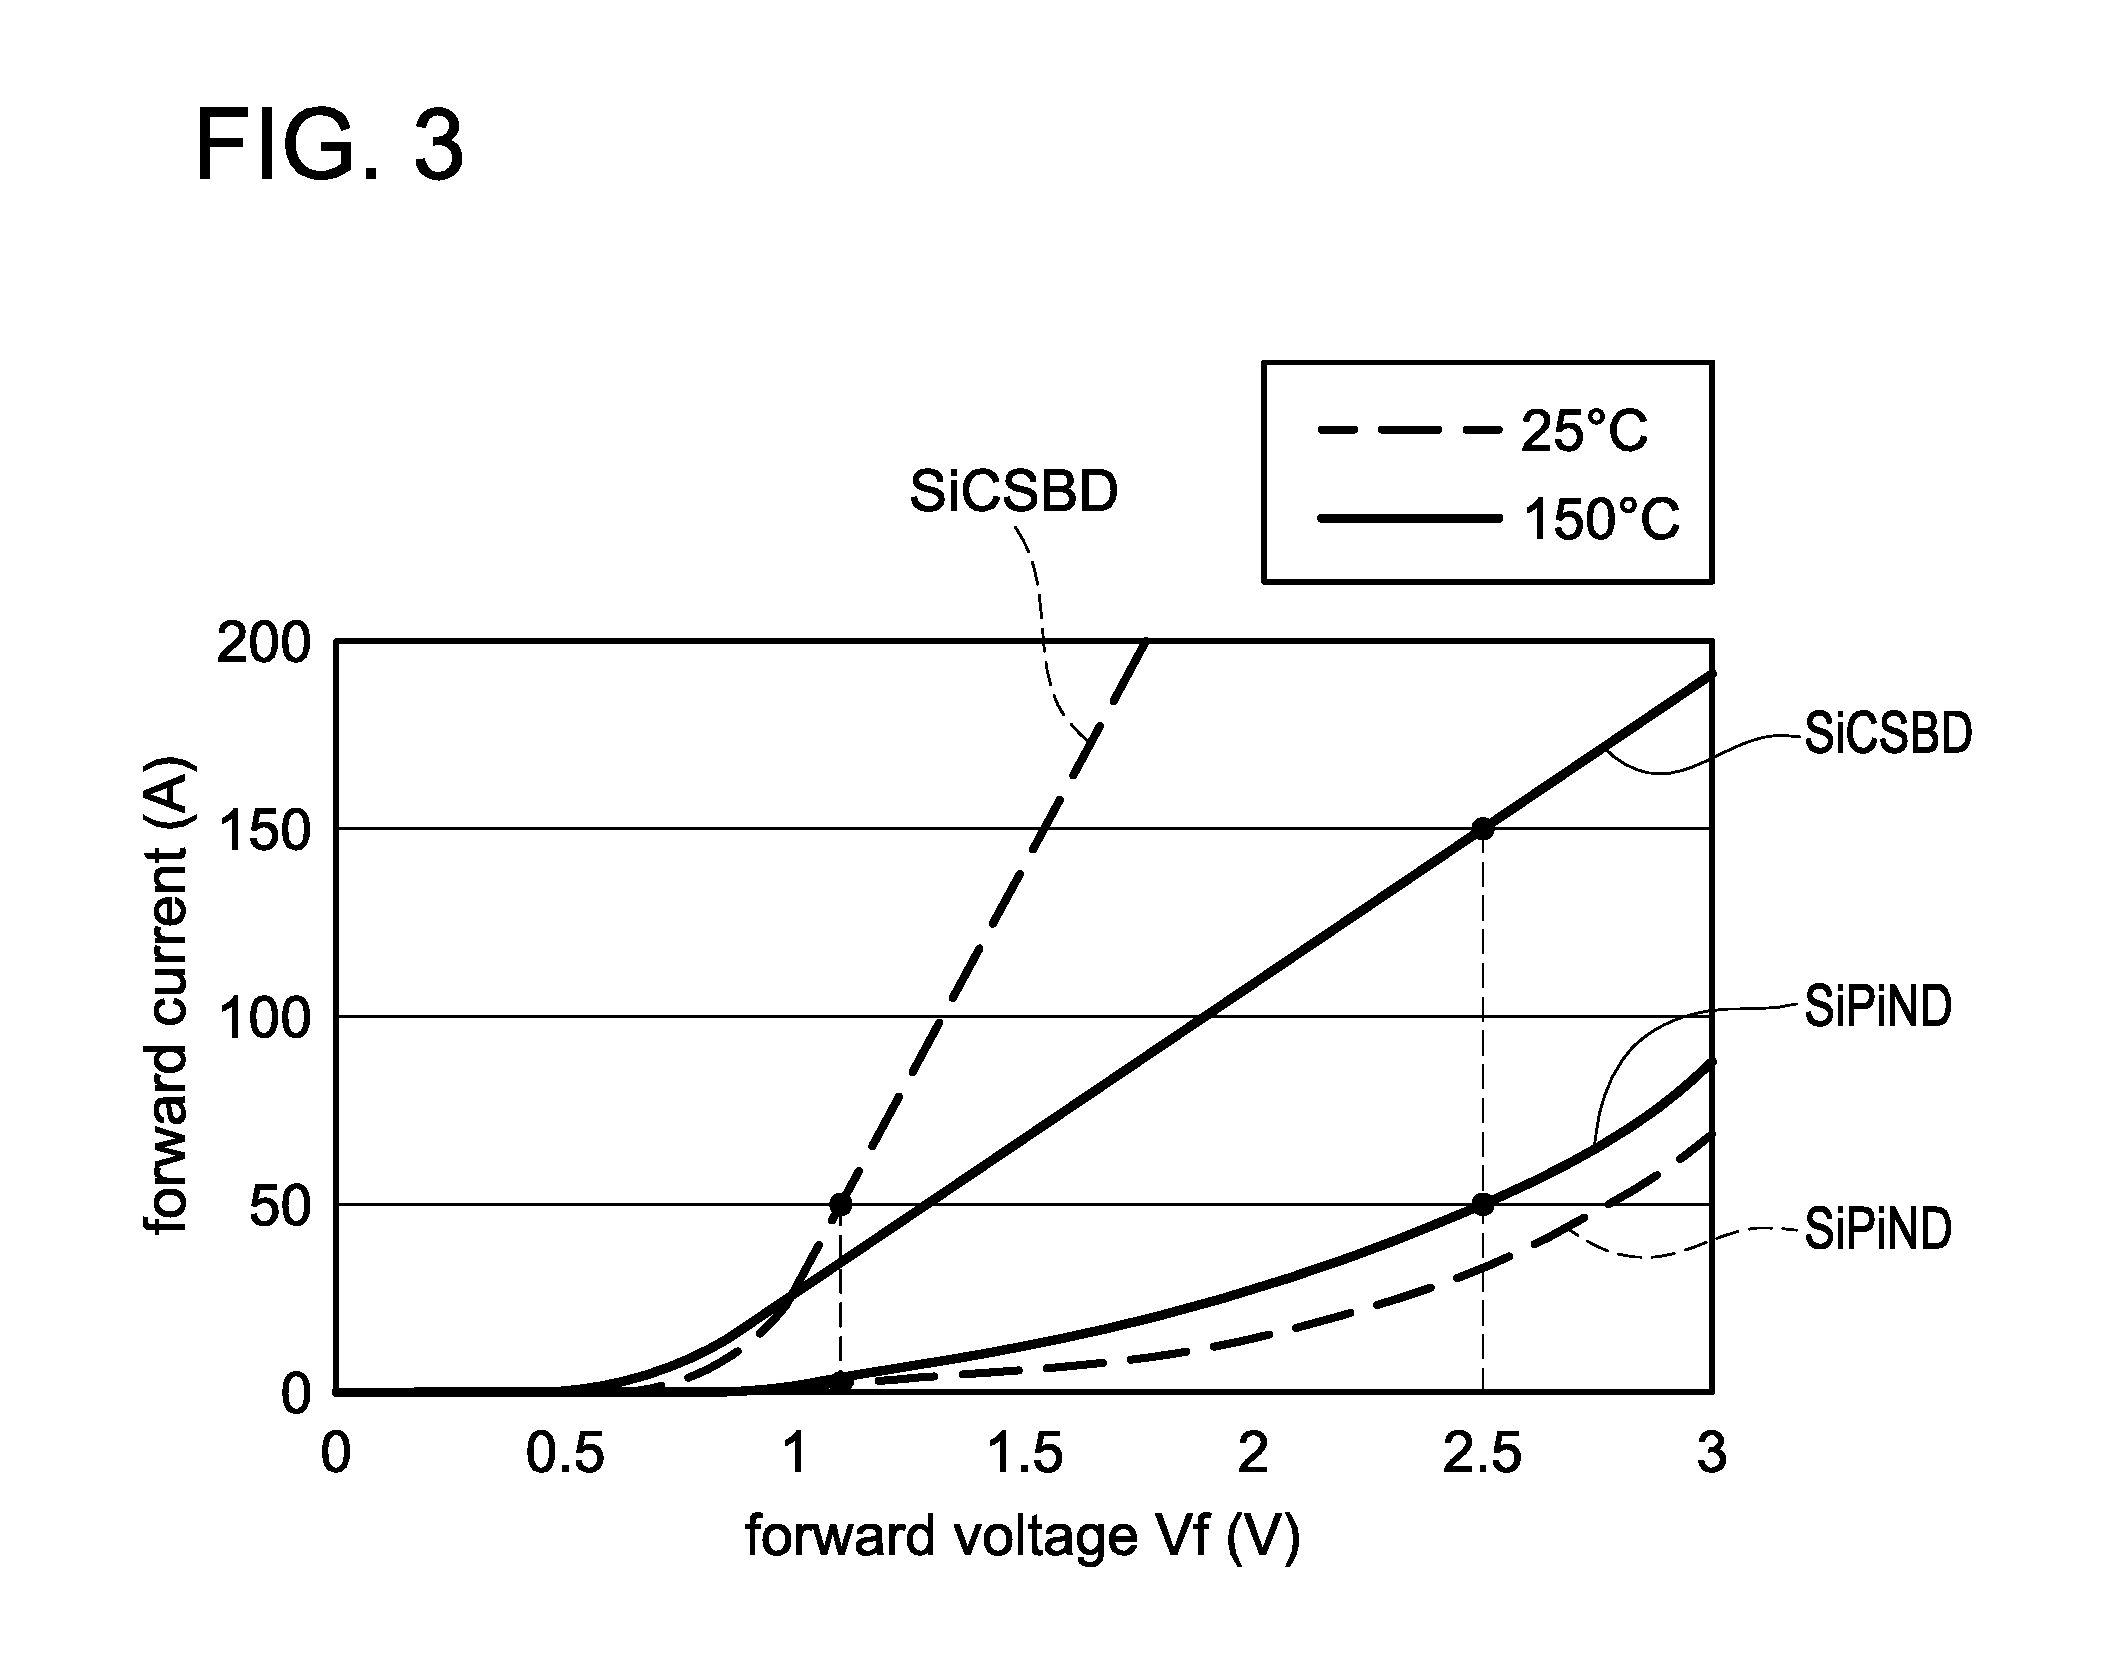 Flyback diode and on-board power source device